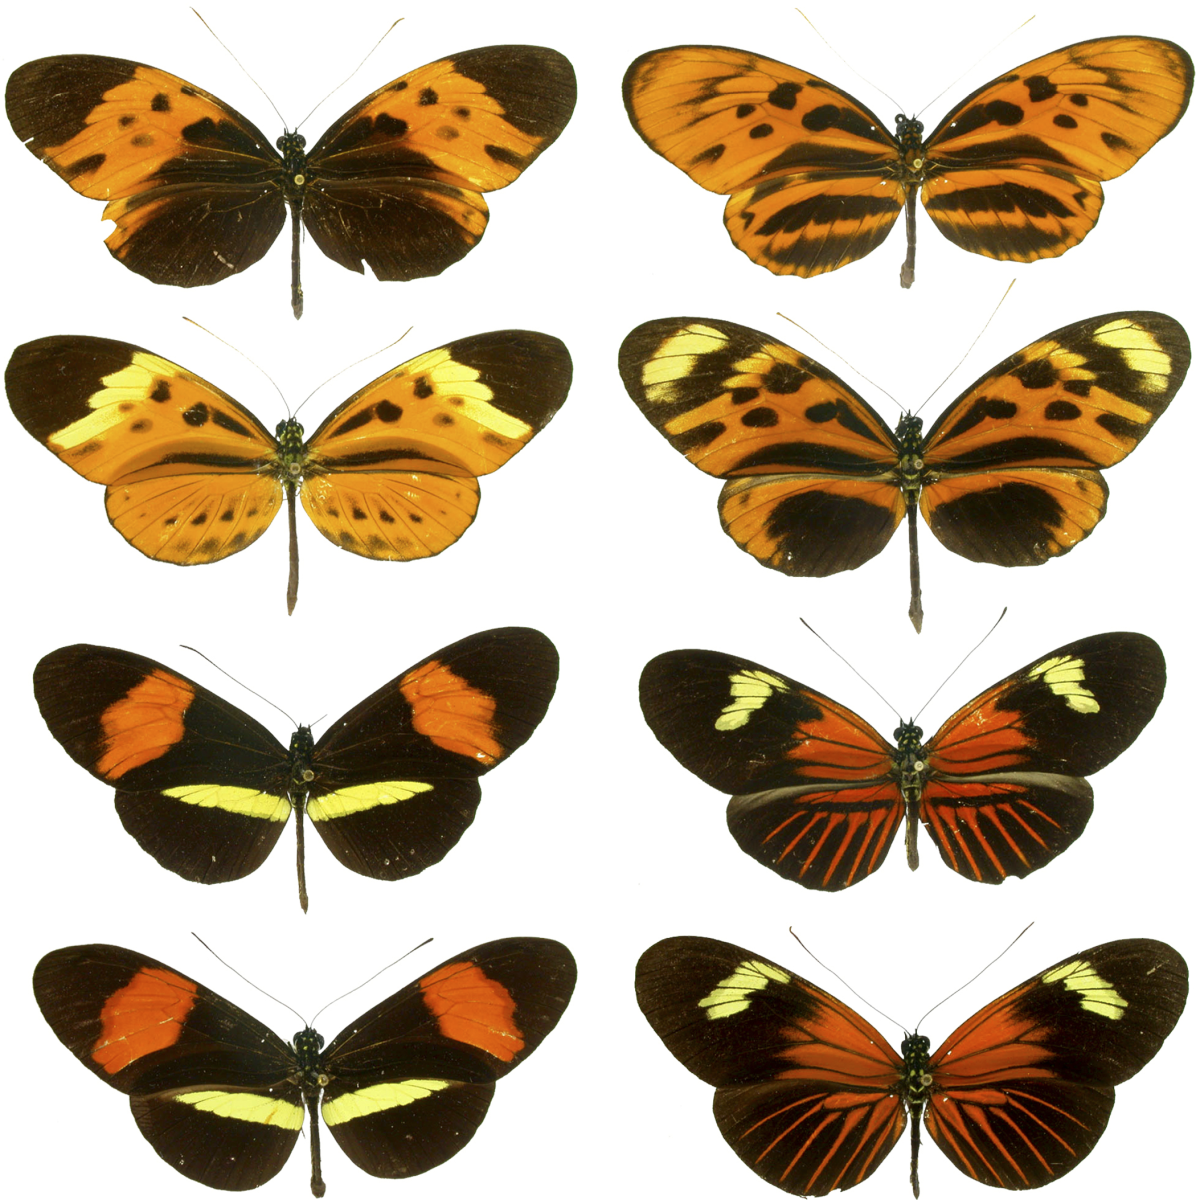 Butterfly mimicry